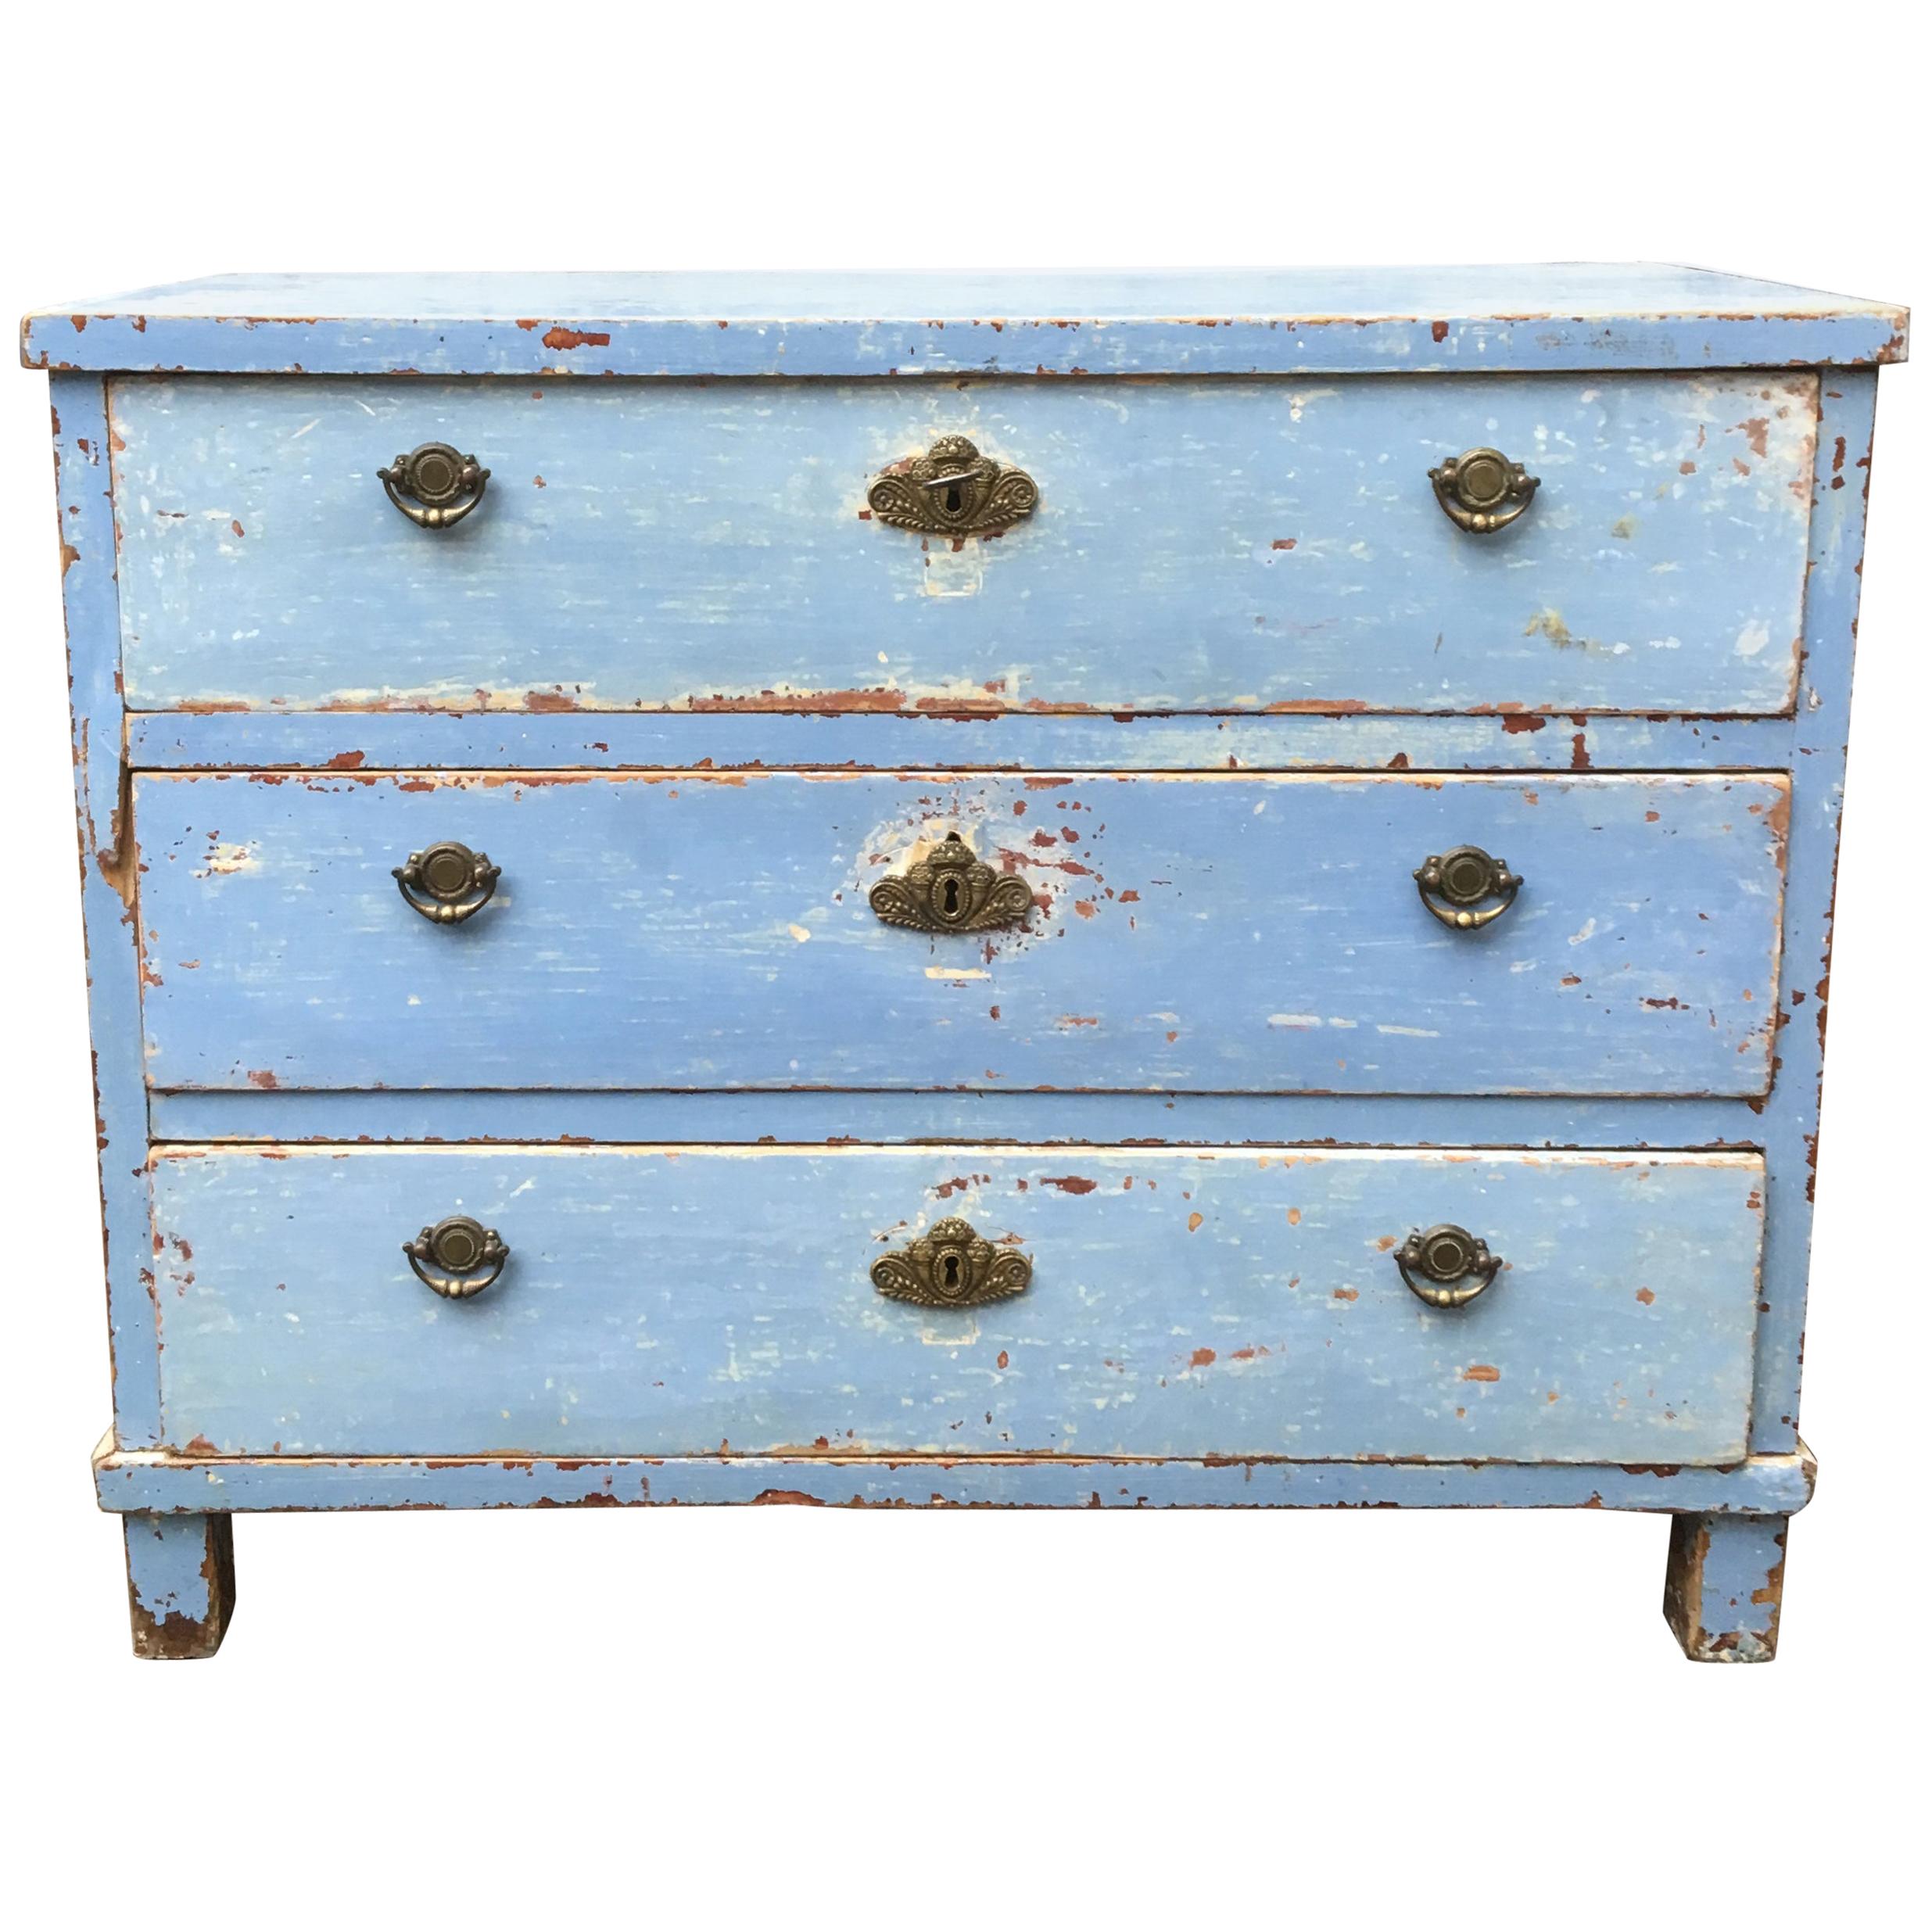 Early 19th Century Swedish Chest of Drawers with Original Blue Scraped Paint